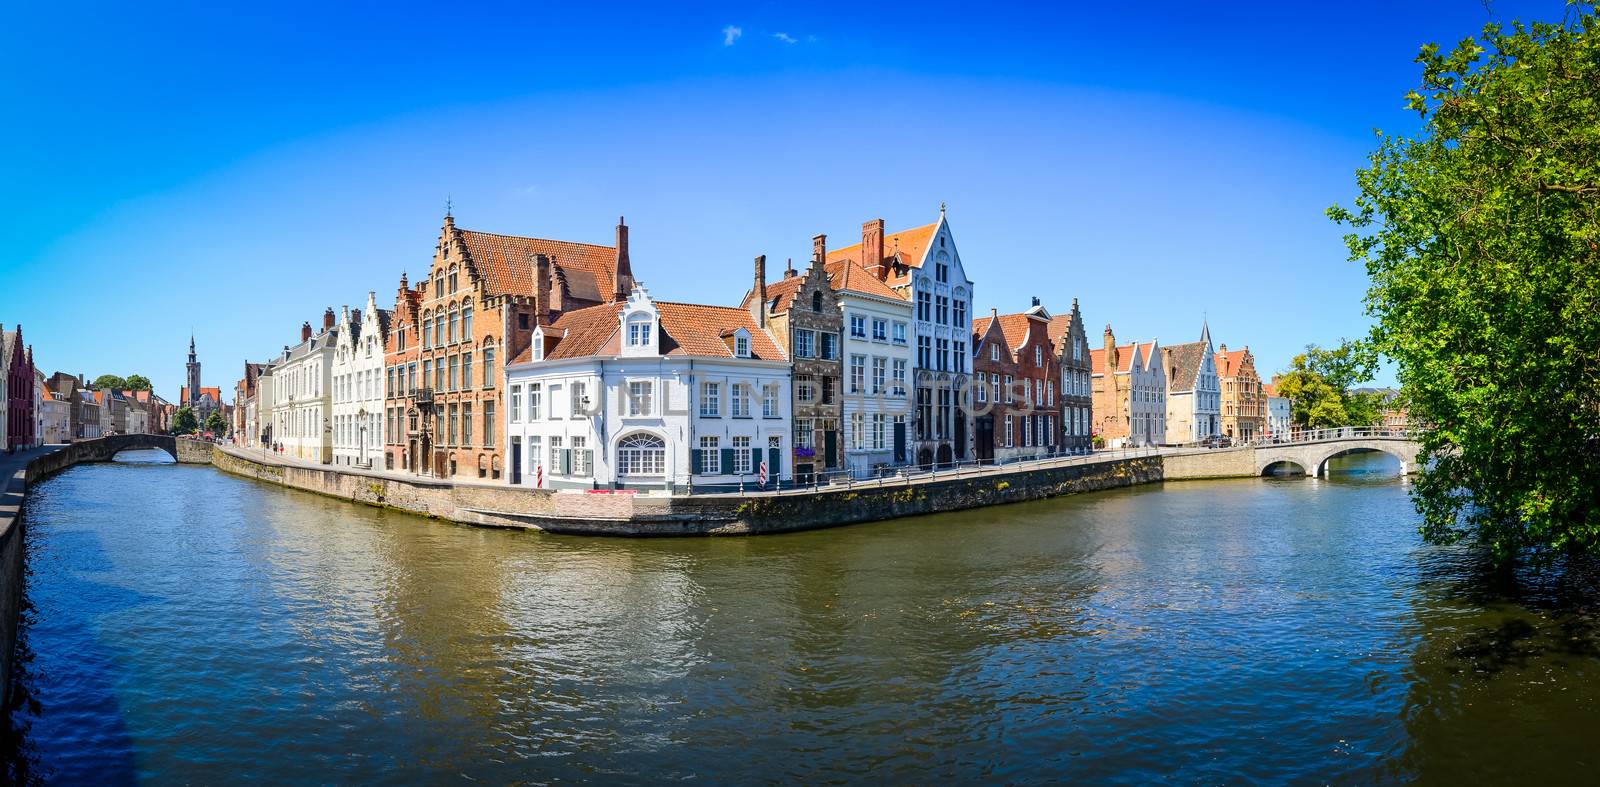 Panorama view of river canal and colorful houses in Bruges, Belgium